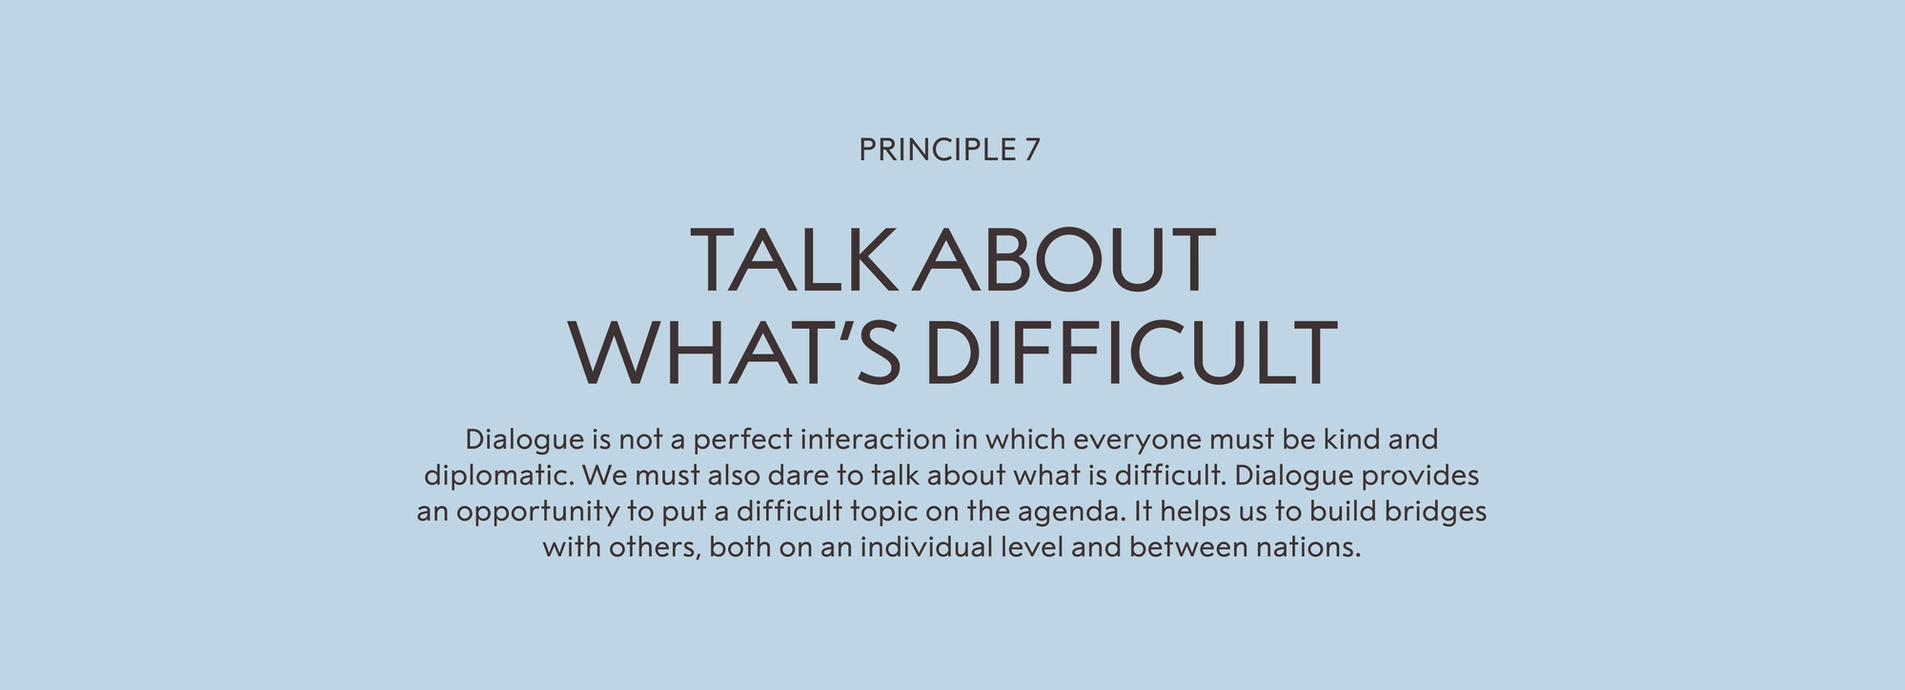 Principle 7: talk about what’s difficult